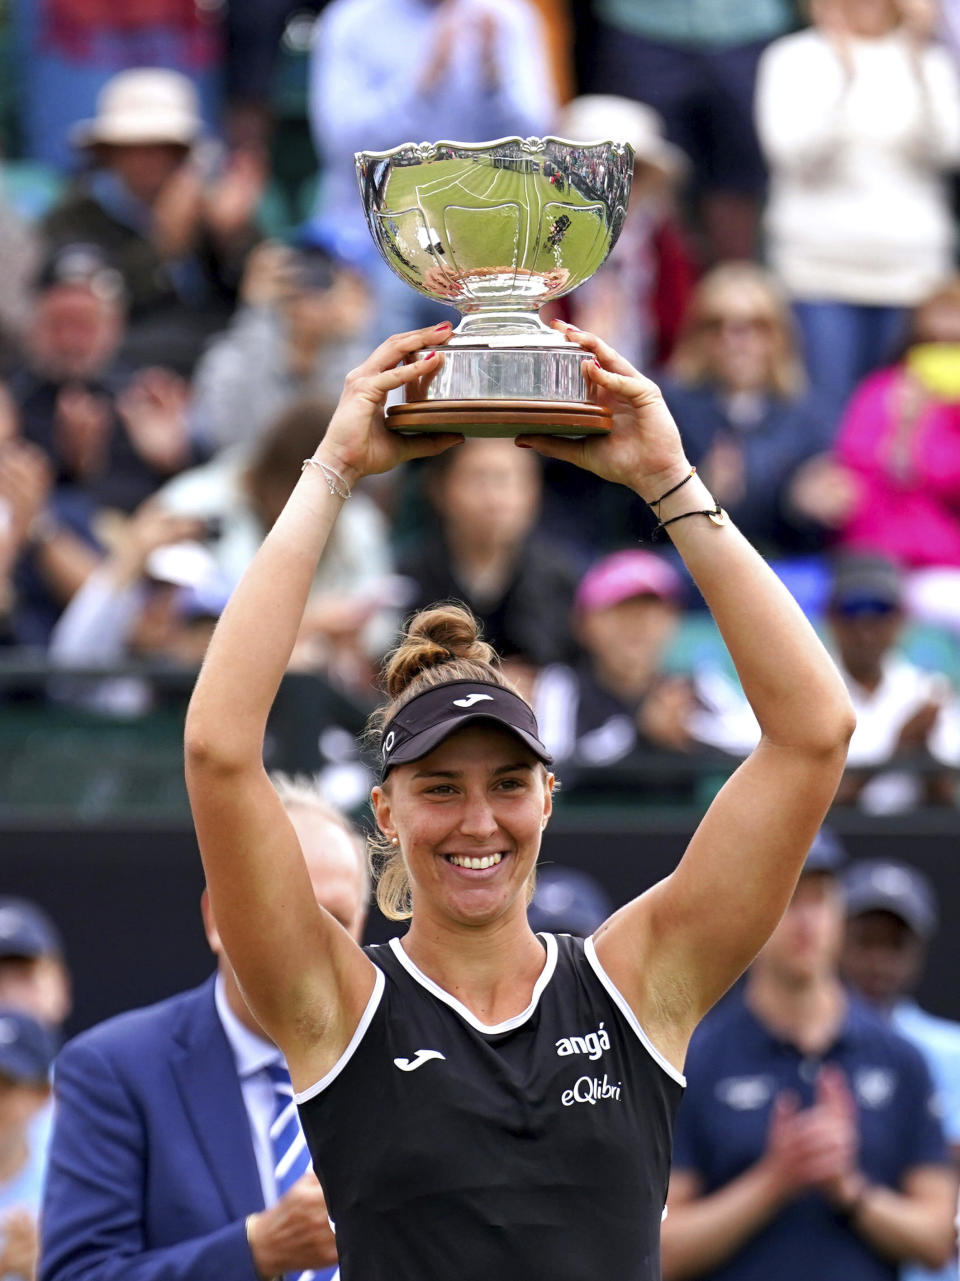 Brazil's Beatriz Haddad Maia celebrates with the trophy after defeating USA's Alison Riske in the women's singles final of the Nottingham Cup Open tennis championship in Nottingham, England, Sunday June 12, 2022. (Tim Goode/PA via AP)